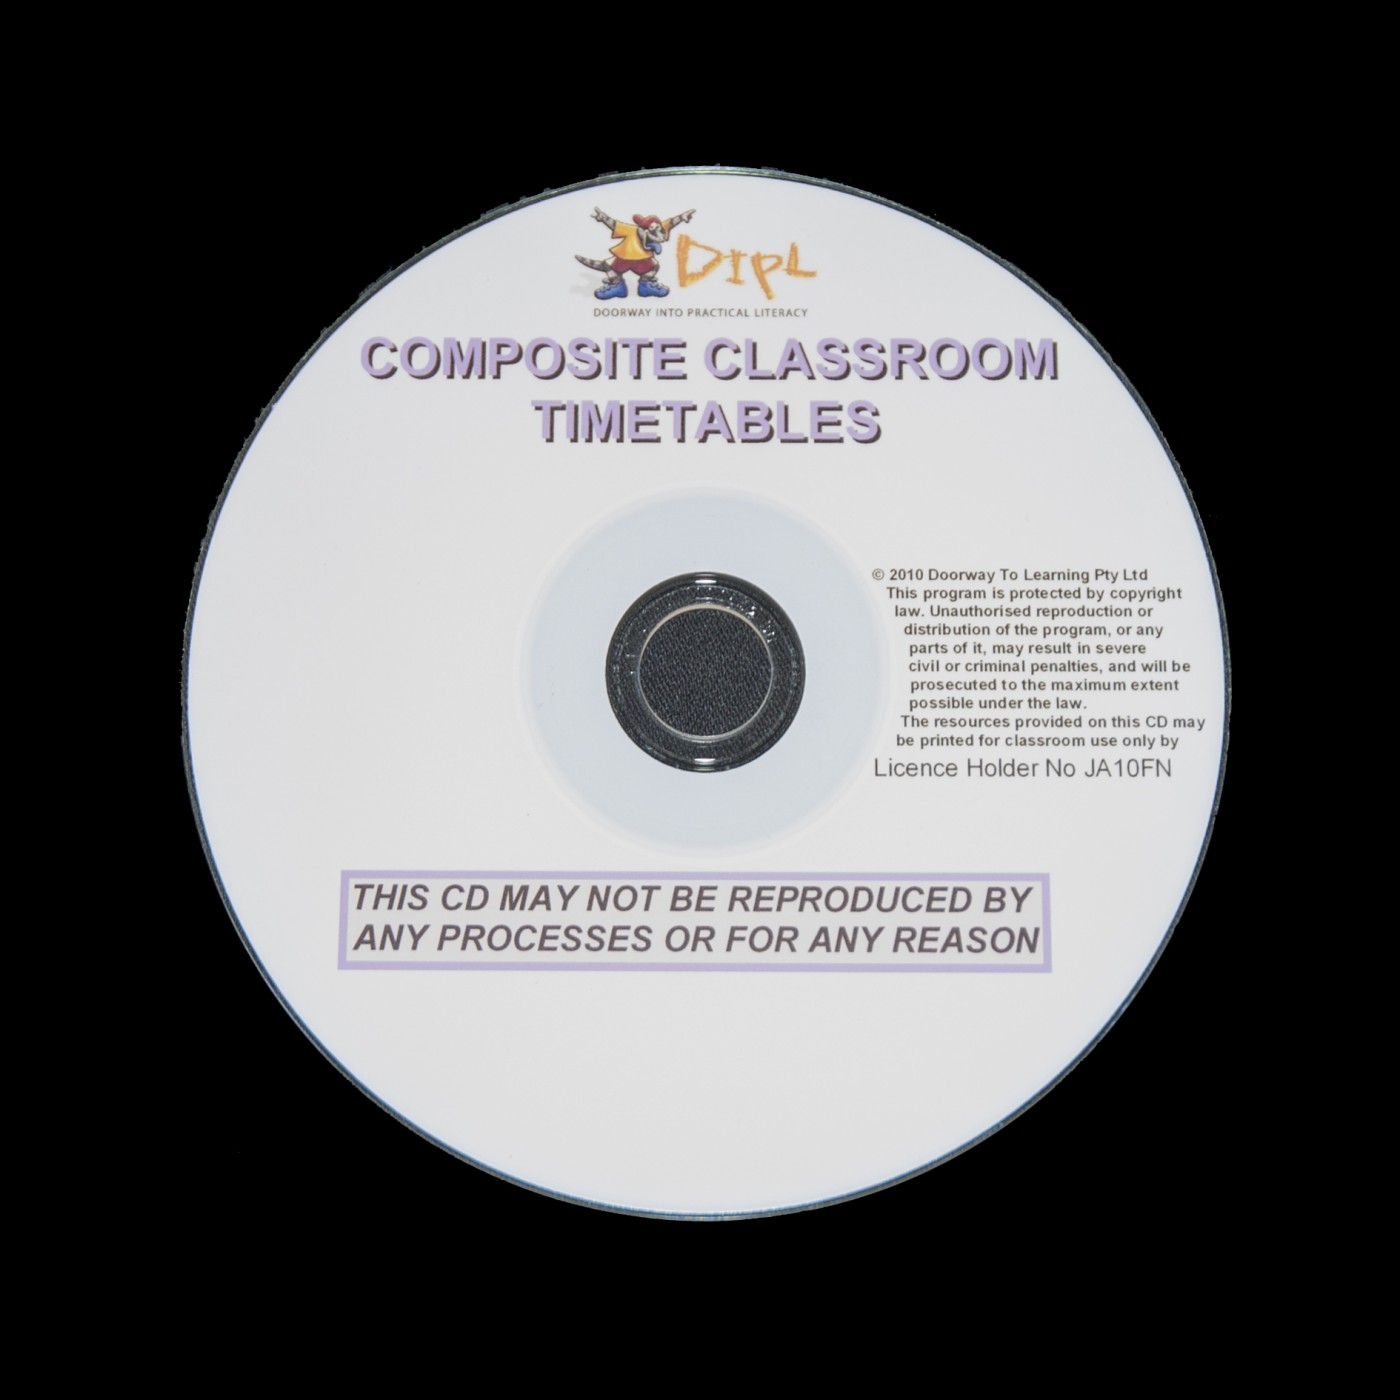 Composite Classroom Timetables on CD